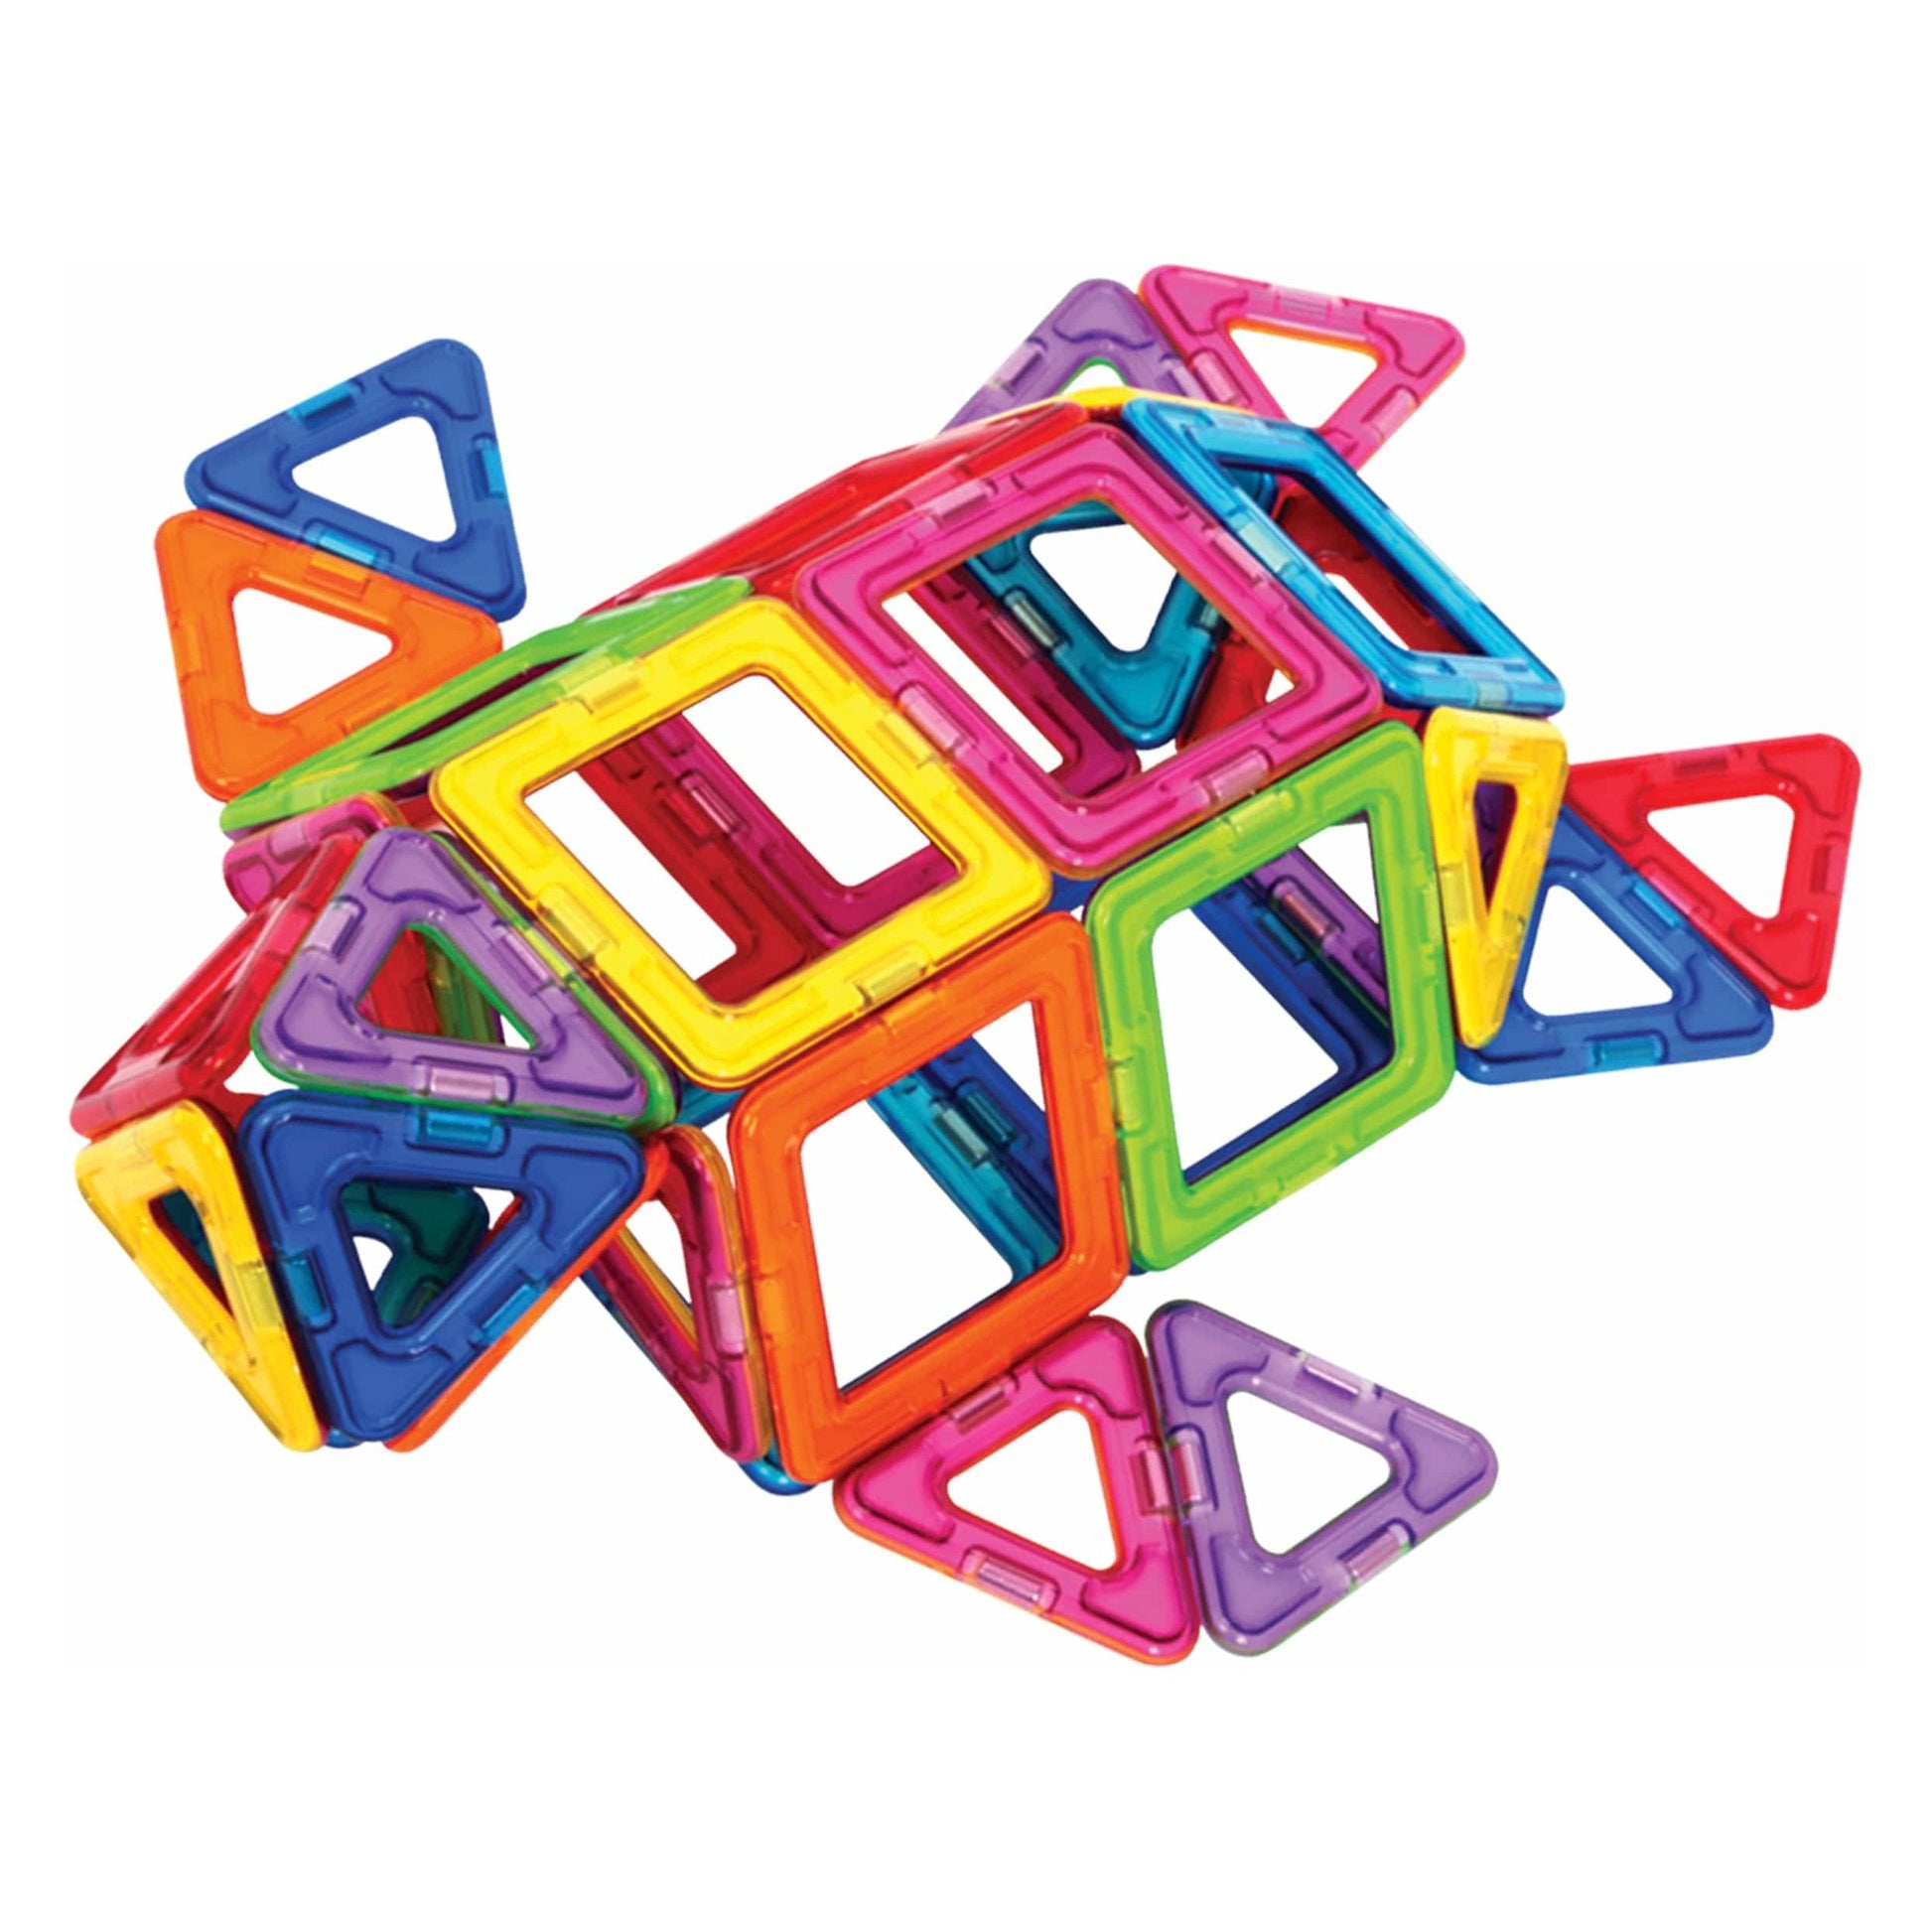 turtle shape made from Magformers construction toy 62 Piece Set